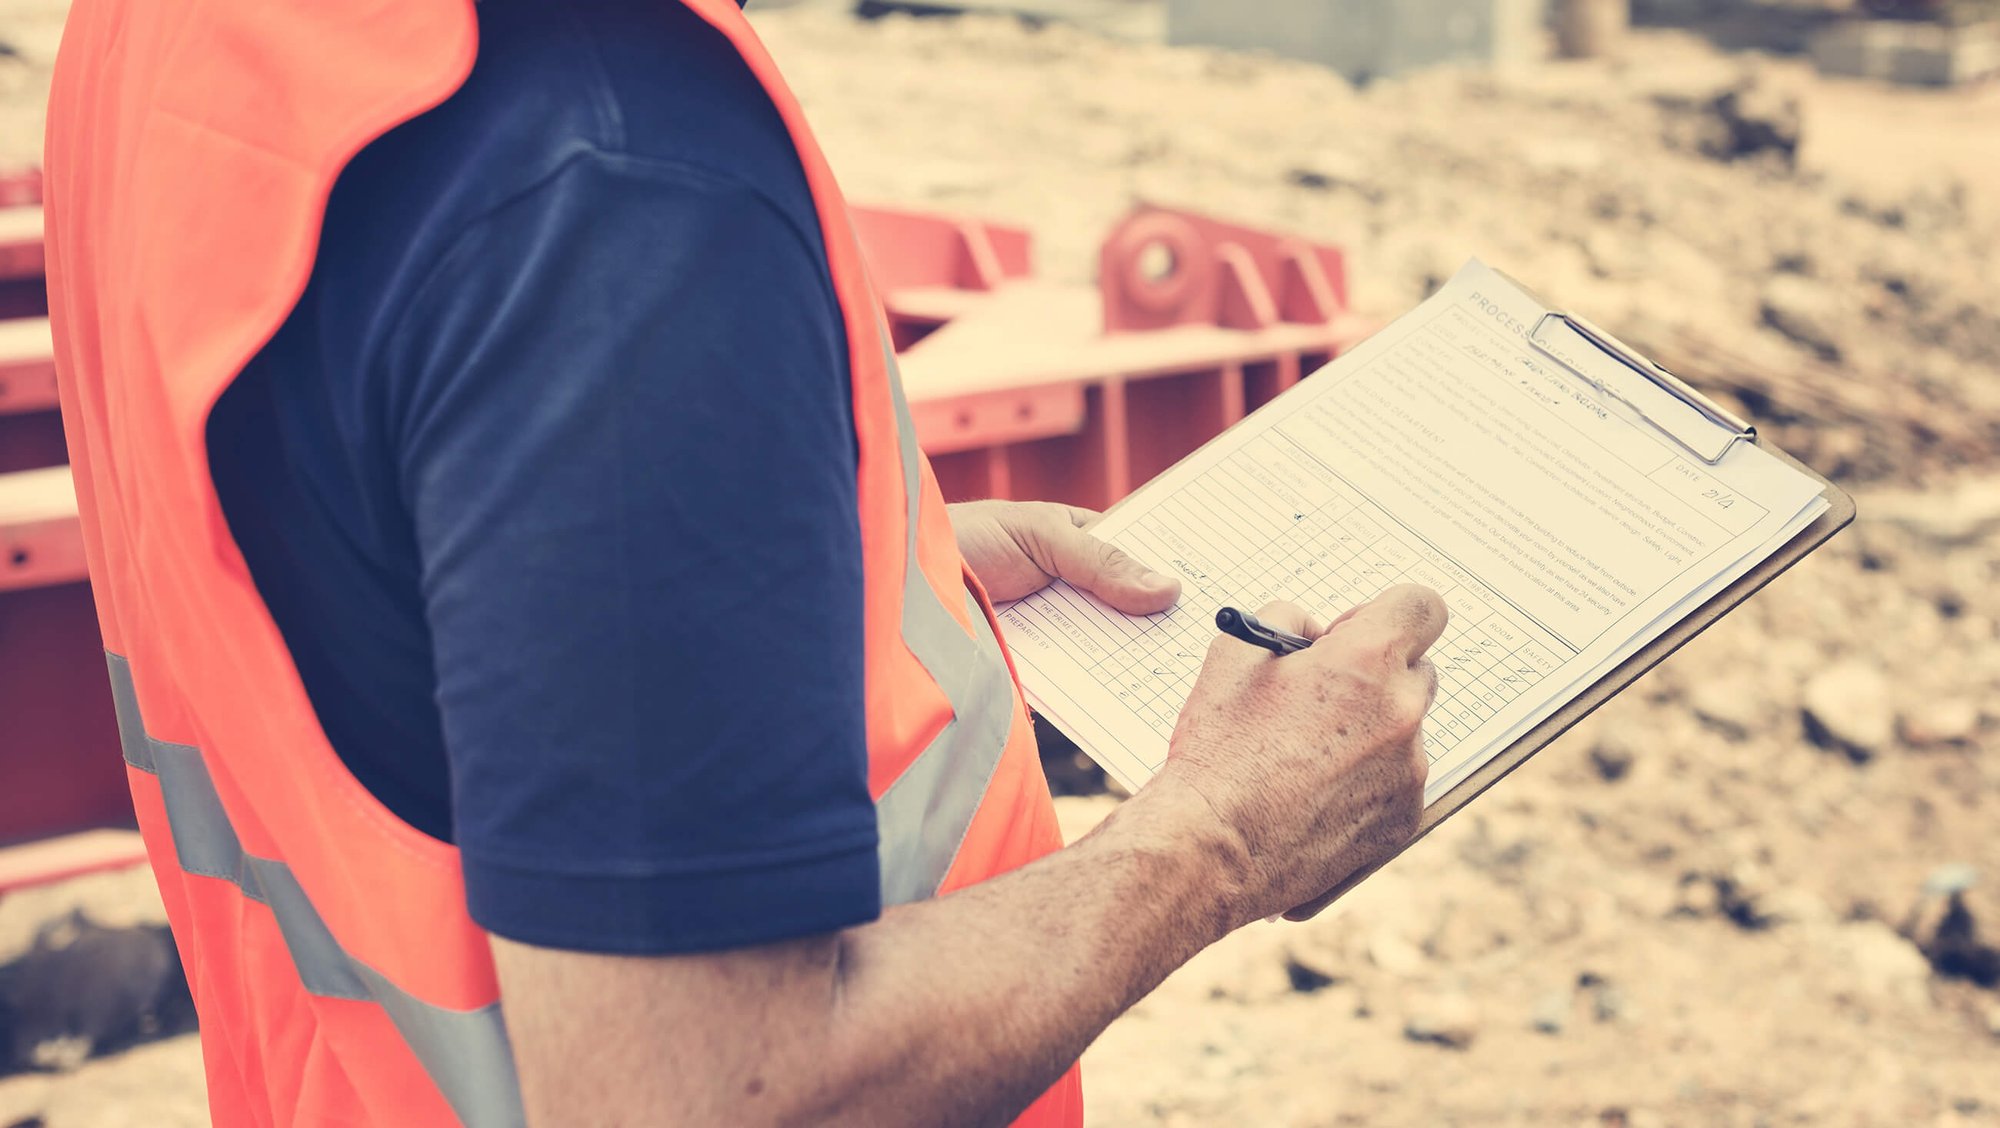 DAVACO employee wearing a blue shirt and orange safety vest, holding a clipboard and pen at an exterior construction site.